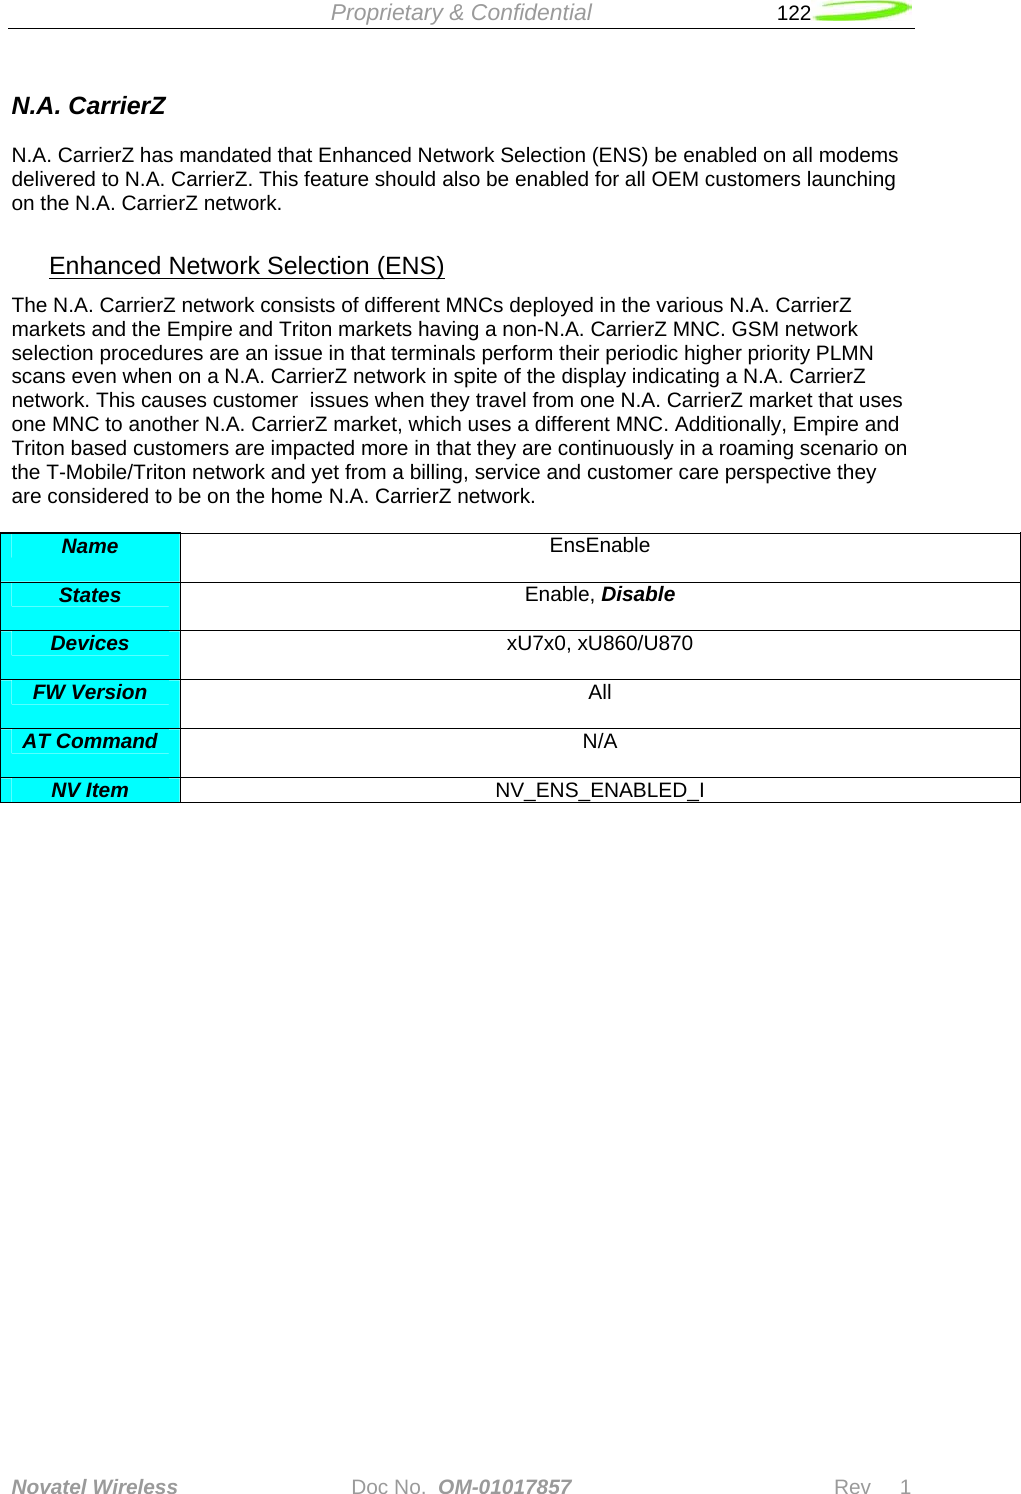  Proprietary &amp; Confidential   122   Novatel Wireless   Doc No.  OM-01017857                              Rev     1  N.A. CarrierZ  N.A. CarrierZ has mandated that Enhanced Network Selection (ENS) be enabled on all modems delivered to N.A. CarrierZ. This feature should also be enabled for all OEM customers launching on the N.A. CarrierZ network.  Enhanced Network Selection (ENS) The N.A. CarrierZ network consists of different MNCs deployed in the various N.A. CarrierZ markets and the Empire and Triton markets having a non-N.A. CarrierZ MNC. GSM network selection procedures are an issue in that terminals perform their periodic higher priority PLMN scans even when on a N.A. CarrierZ network in spite of the display indicating a N.A. CarrierZ network. This causes customer  issues when they travel from one N.A. CarrierZ market that uses one MNC to another N.A. CarrierZ market, which uses a different MNC. Additionally, Empire and Triton based customers are impacted more in that they are continuously in a roaming scenario on the T-Mobile/Triton network and yet from a billing, service and customer care perspective they are considered to be on the home N.A. CarrierZ network.  Name  EnsEnable  States  Enable, Disable  Devices  xU7x0, xU860/U870  FW Version  All  AT Command  N/A  NV Item  NV_ENS_ENABLED_I 